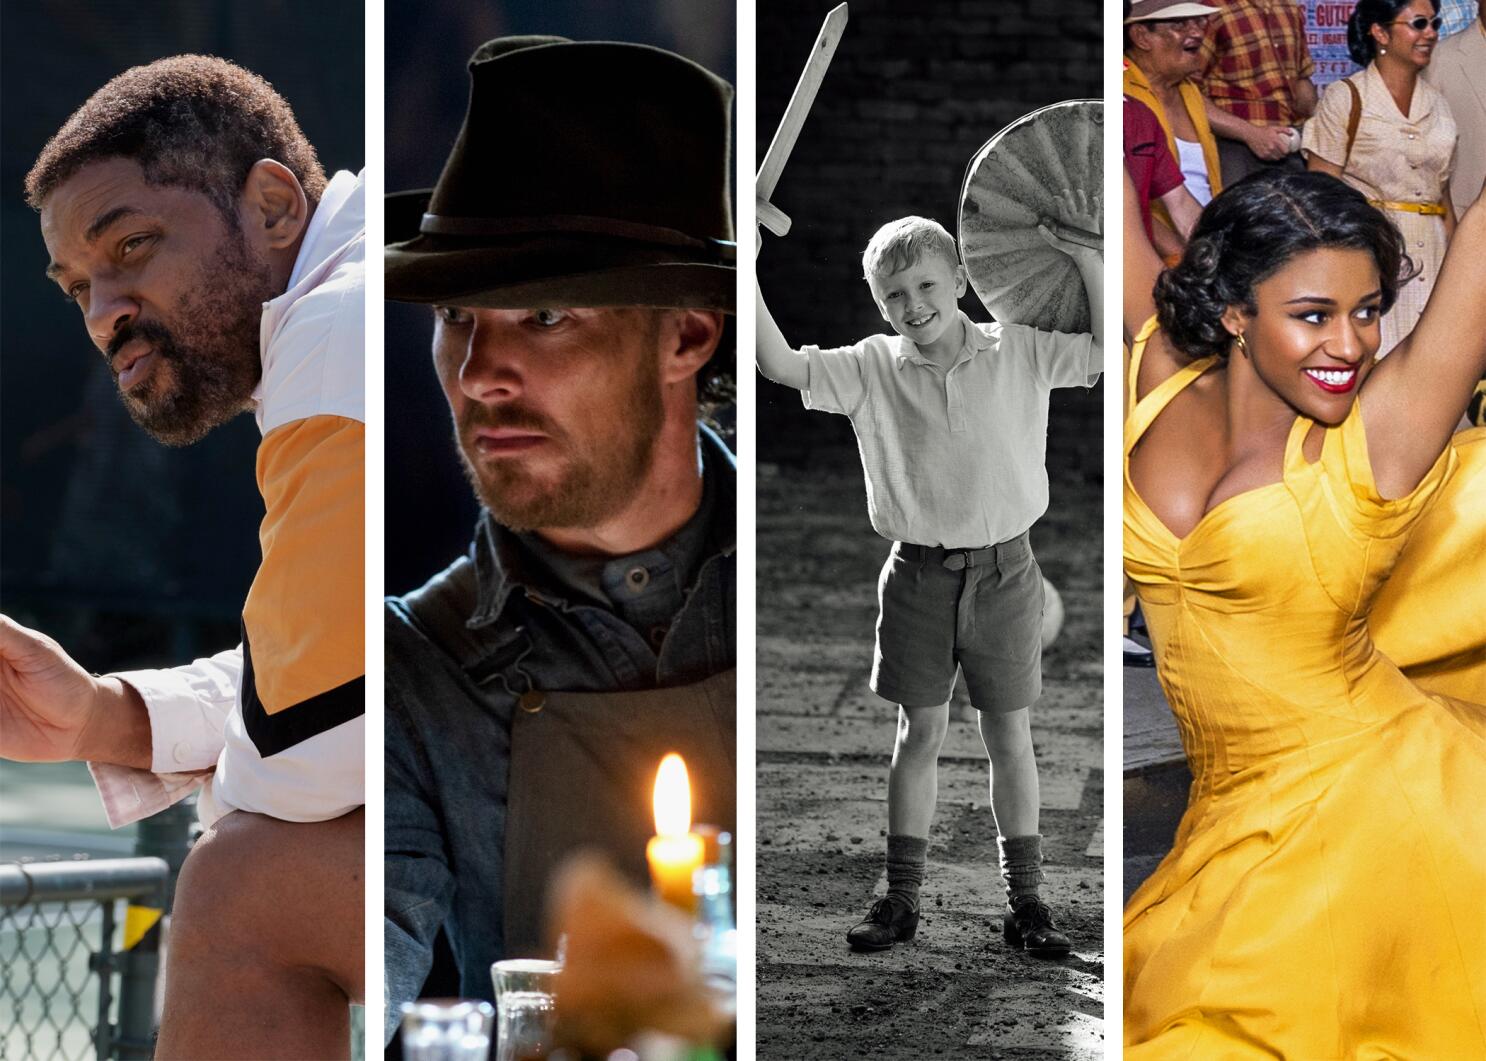 2021 Movies the Oscars Snubbed: From The French Dispatch to C'mon C'mon